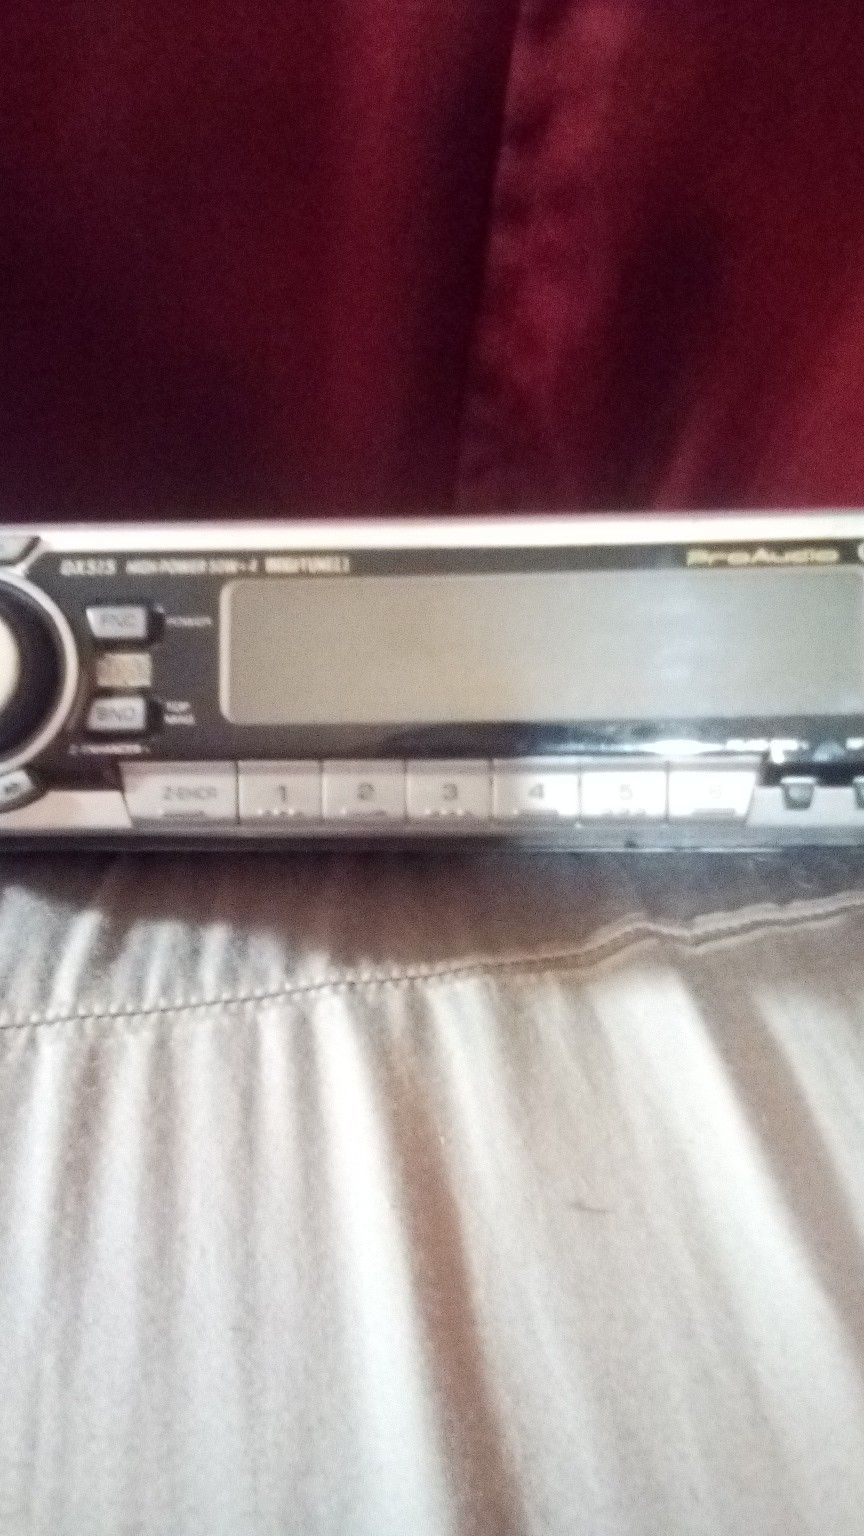 Clarion pro audio cd player